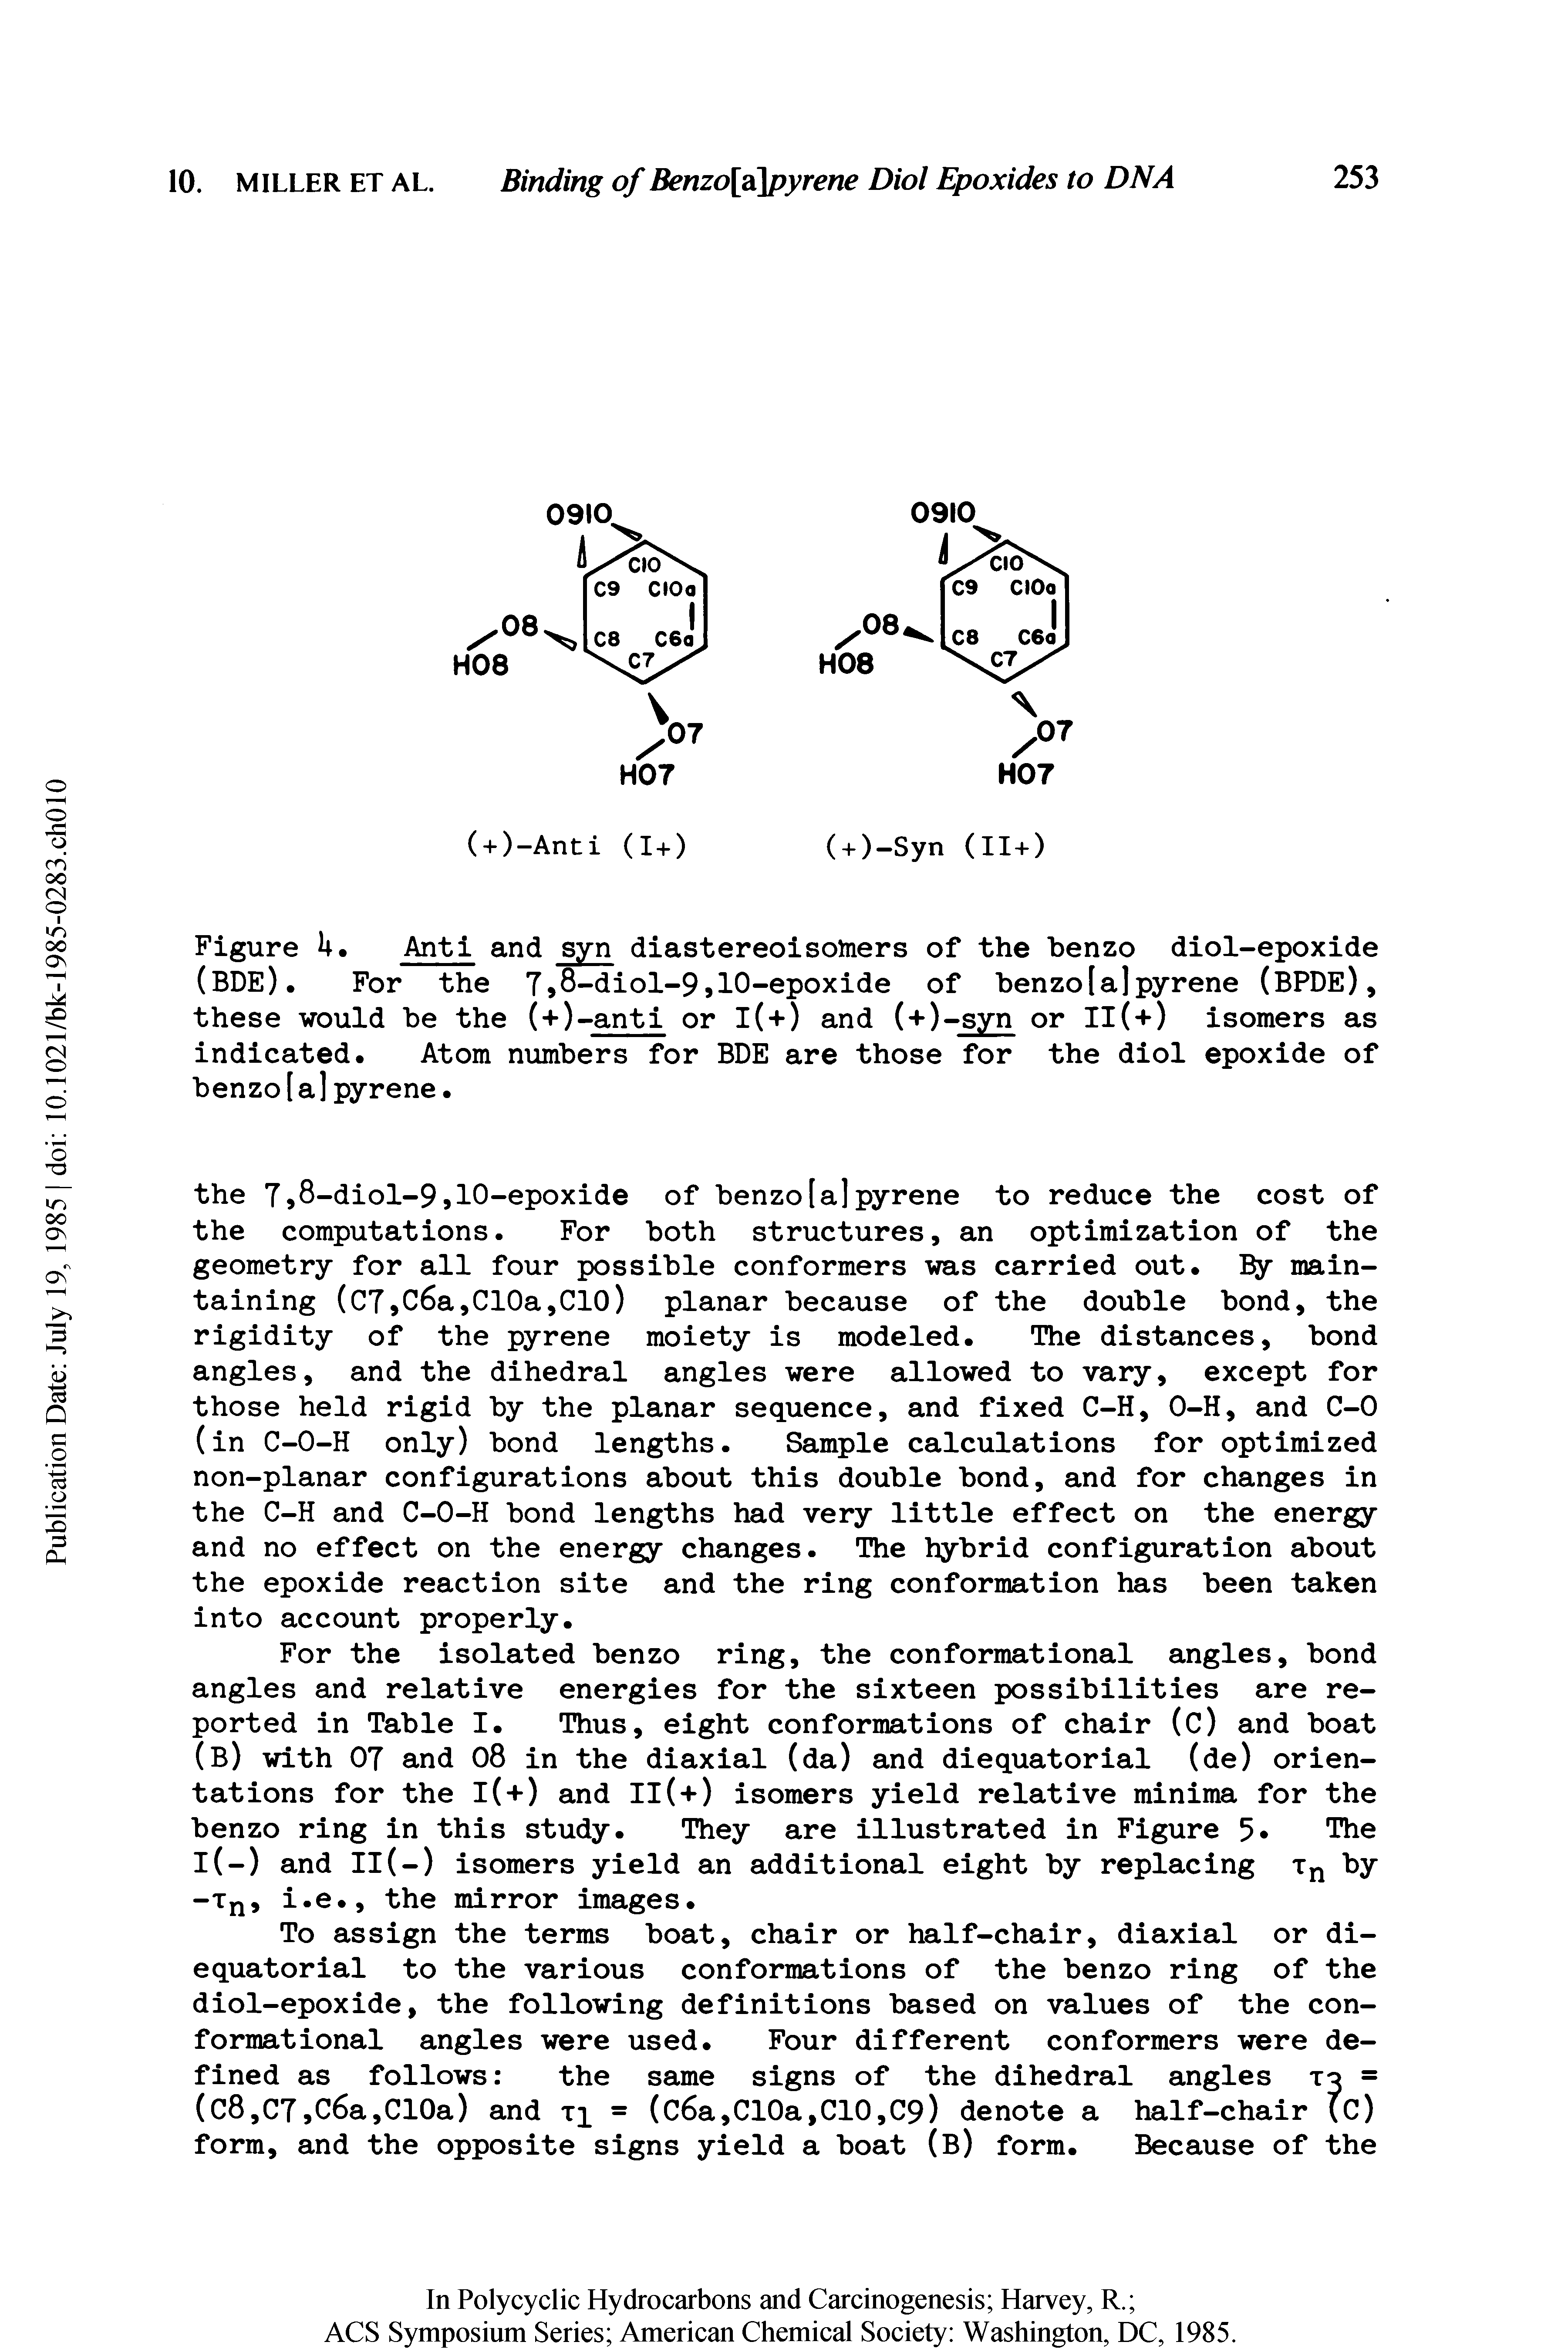 Figure U. Anti and syn diastereoisomers of the benzo diol-epoxide (BDE). For the 7,8-diol-9,10-epoxide of benzo[a]pyrene (BPDE), these would be the (+)-anti or l(+) and (+)-syn or Il(+) isomers as indicated. Atom numbers for BDE are those for the diol epoxide of benzo[a]pyrene.